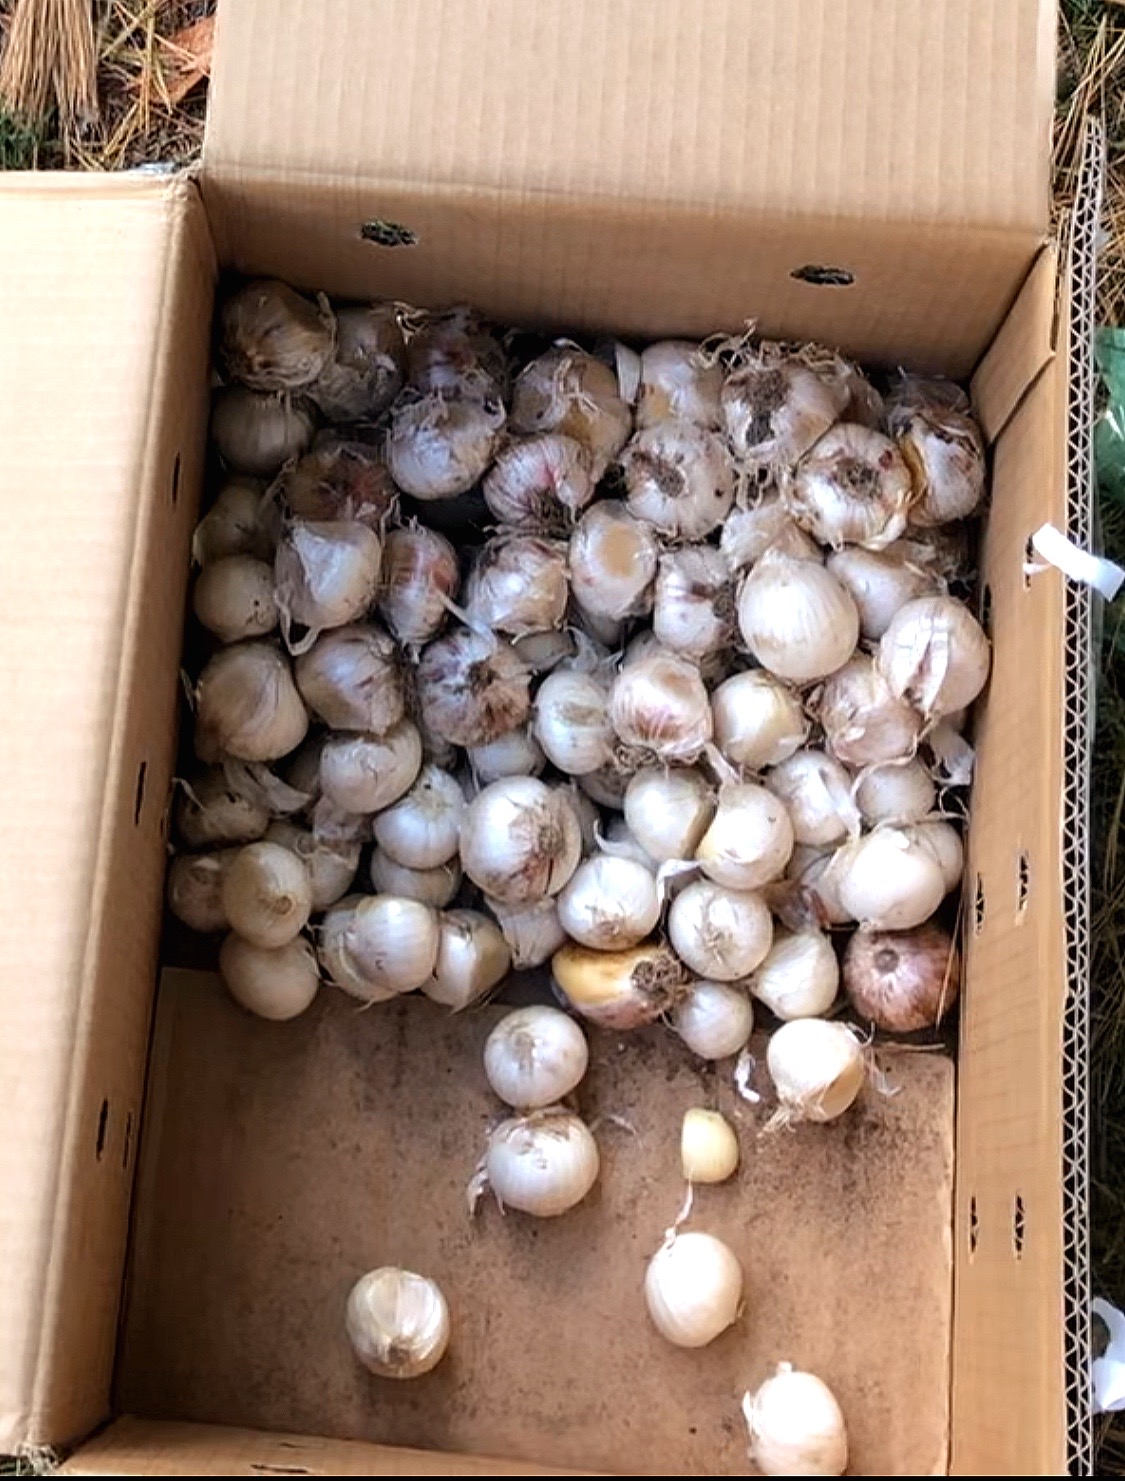 A box of garlic is sitting on the ground.